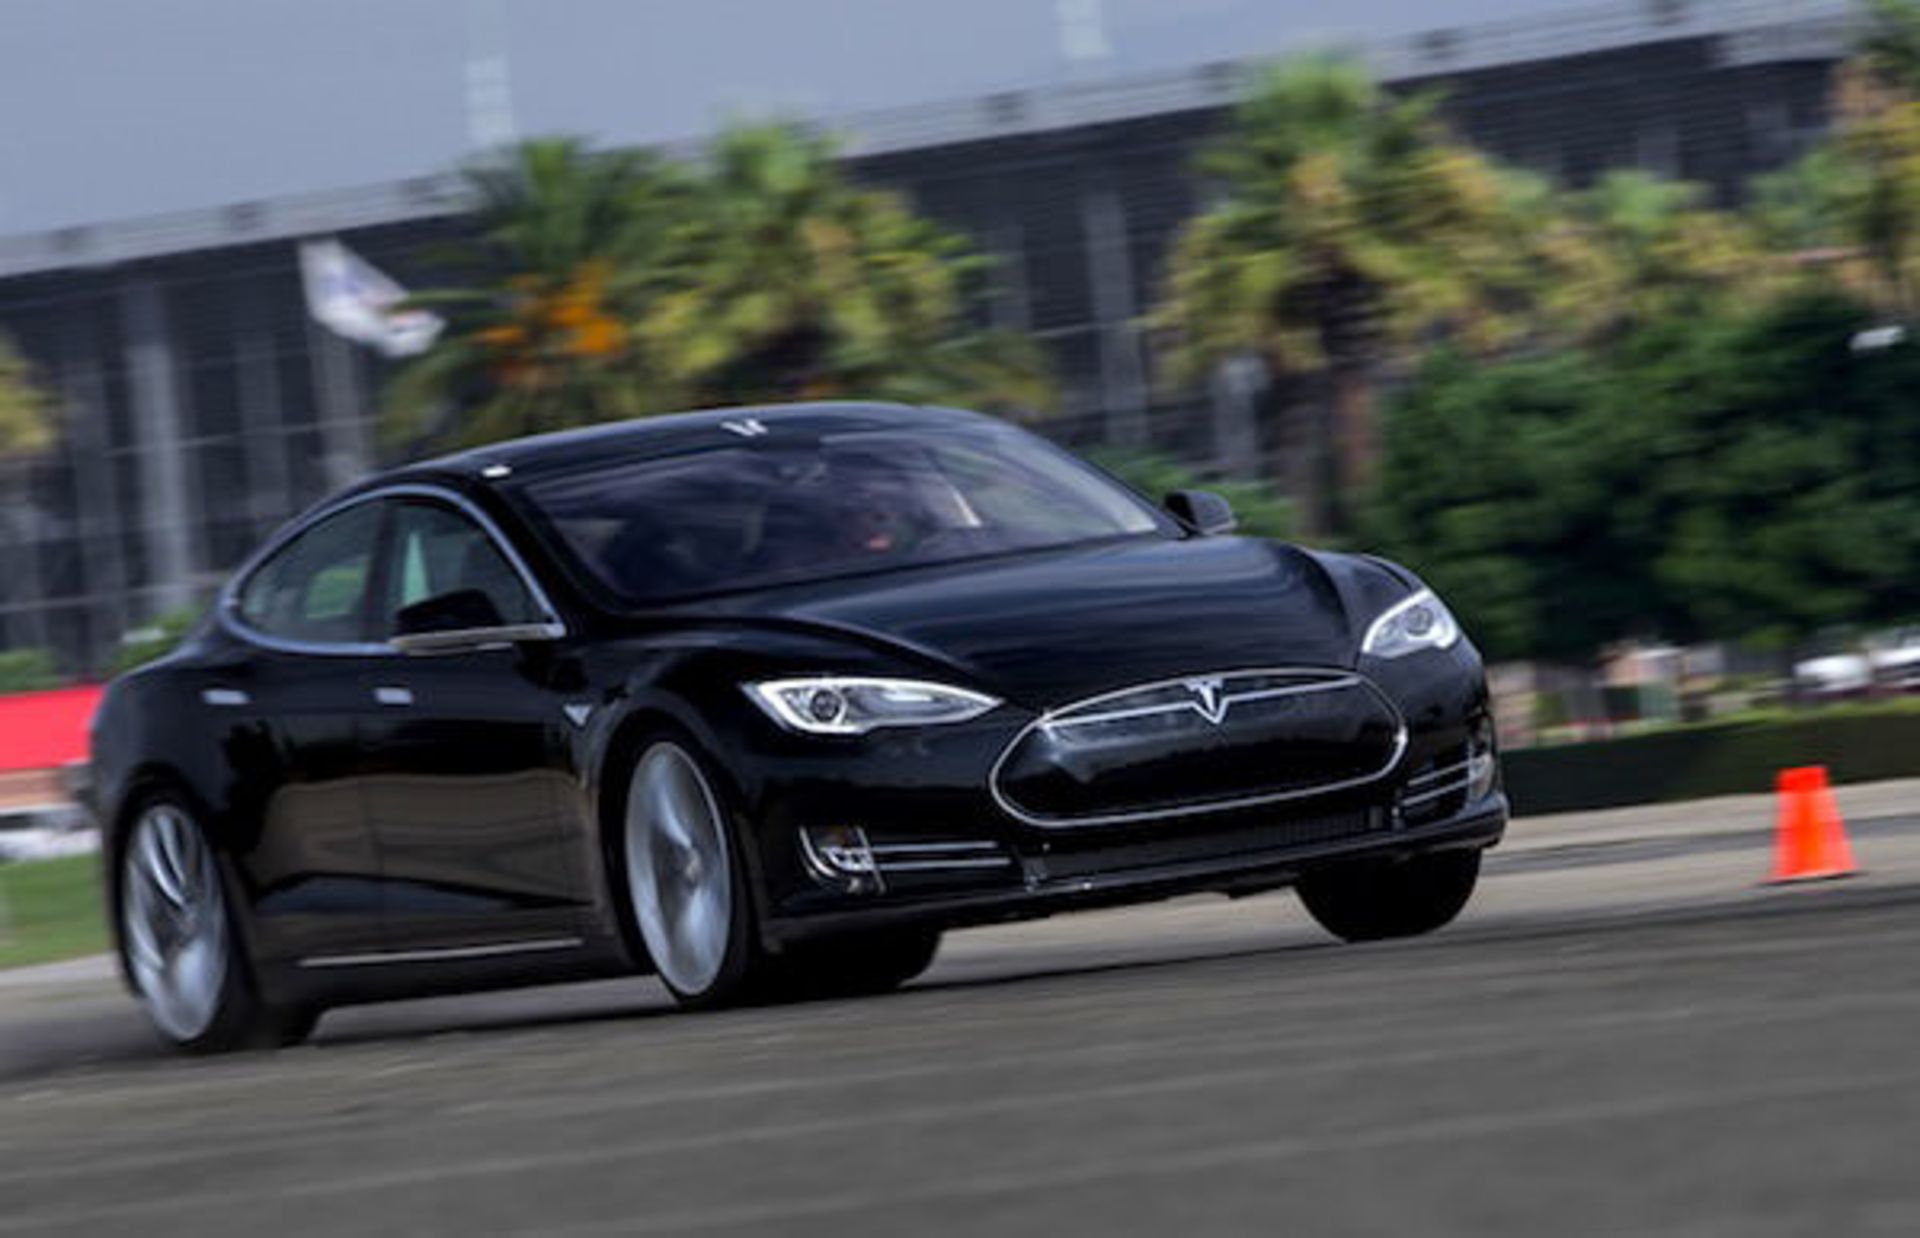 Tesla-Model-S-Norway-September-2013.-Picture-courtesy-of-motortrend.com-P2